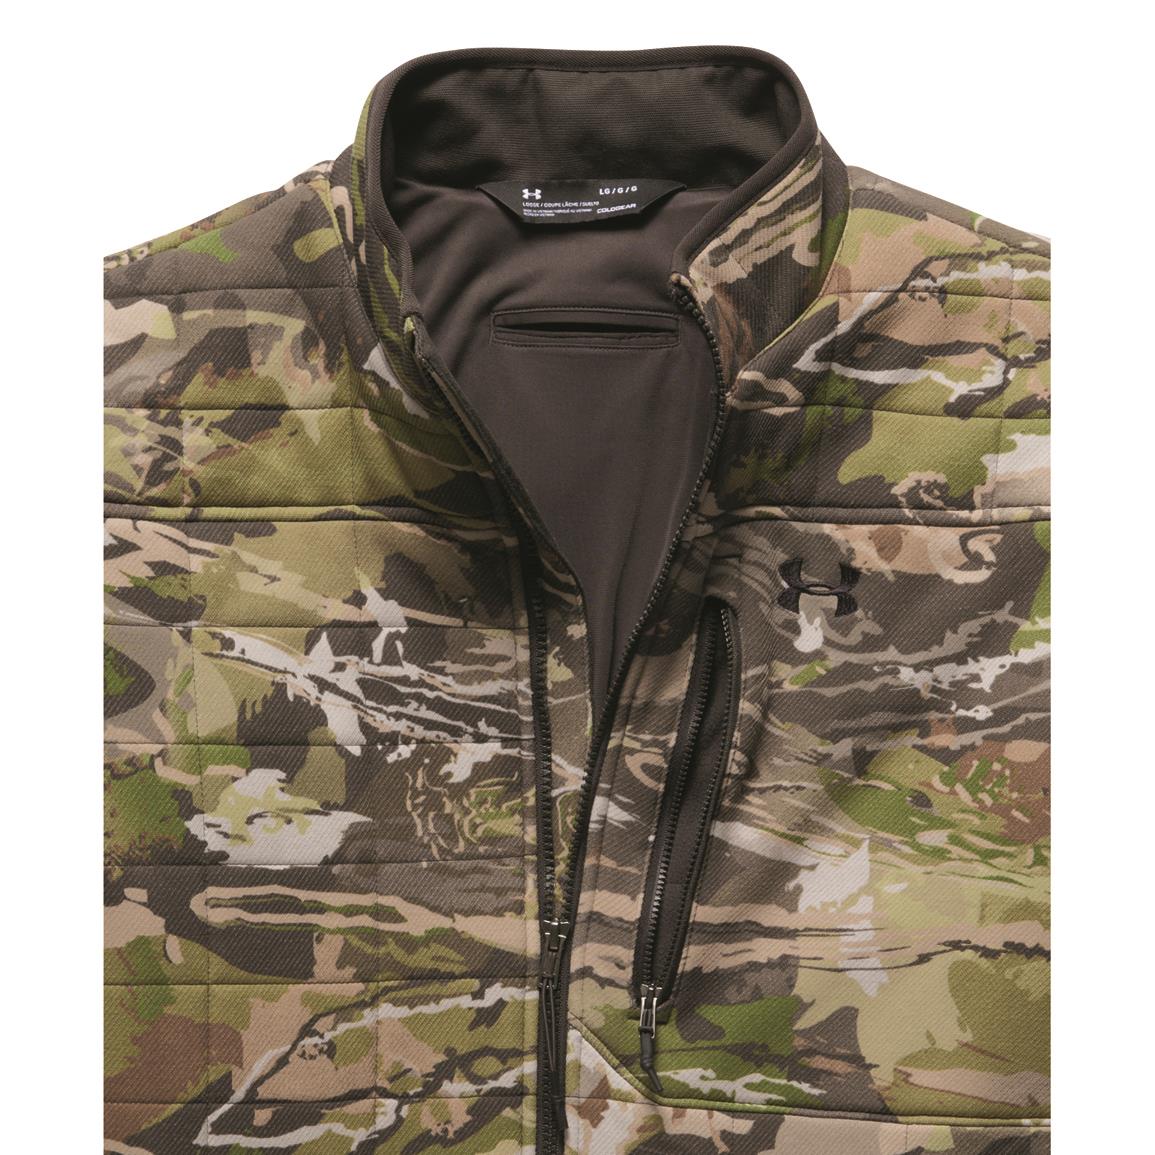 under armour men's stealth extreme jacket